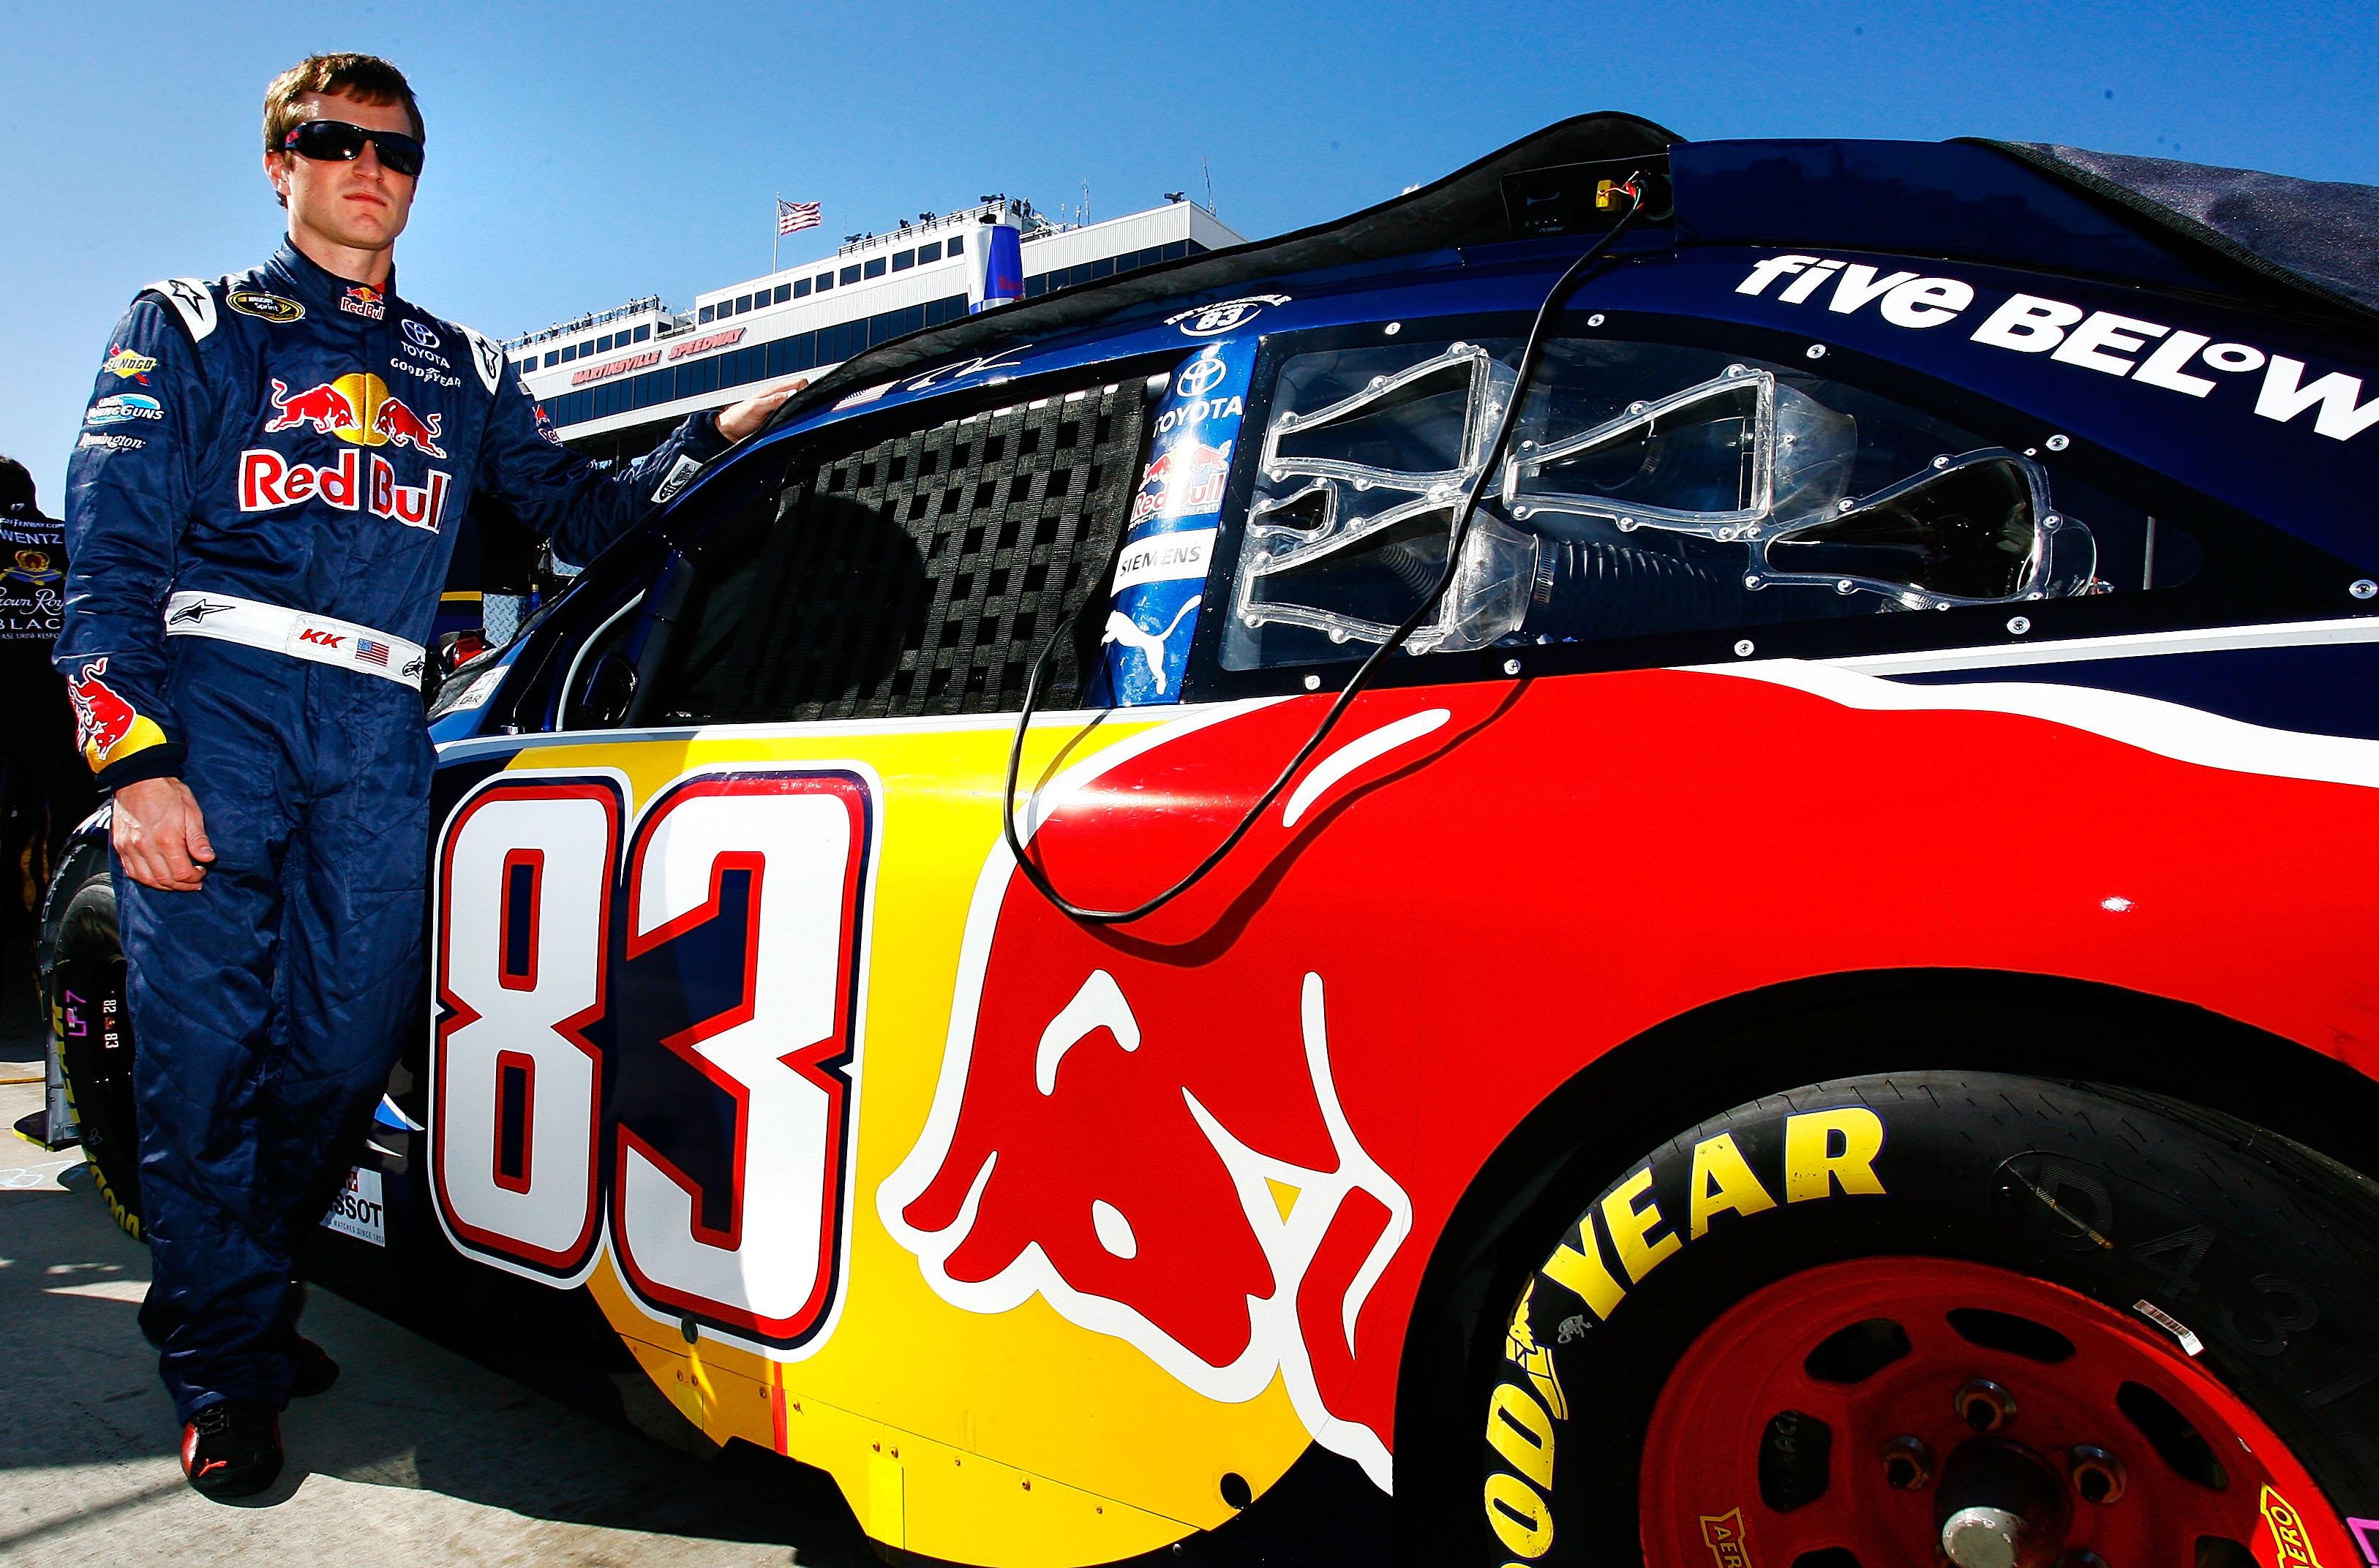 MARTINSVILLE, VA - OCTOBER 24:  Kasey Kahne, driver of the #83 Red Bull Toyota, stands next to his car on the grid prior to the NASCAR Sprint Cup Series TUMS Fast Relief 500 at Martinsville Speedway on October 24, 2010 in Martinsville, Virginia.  (Photo b